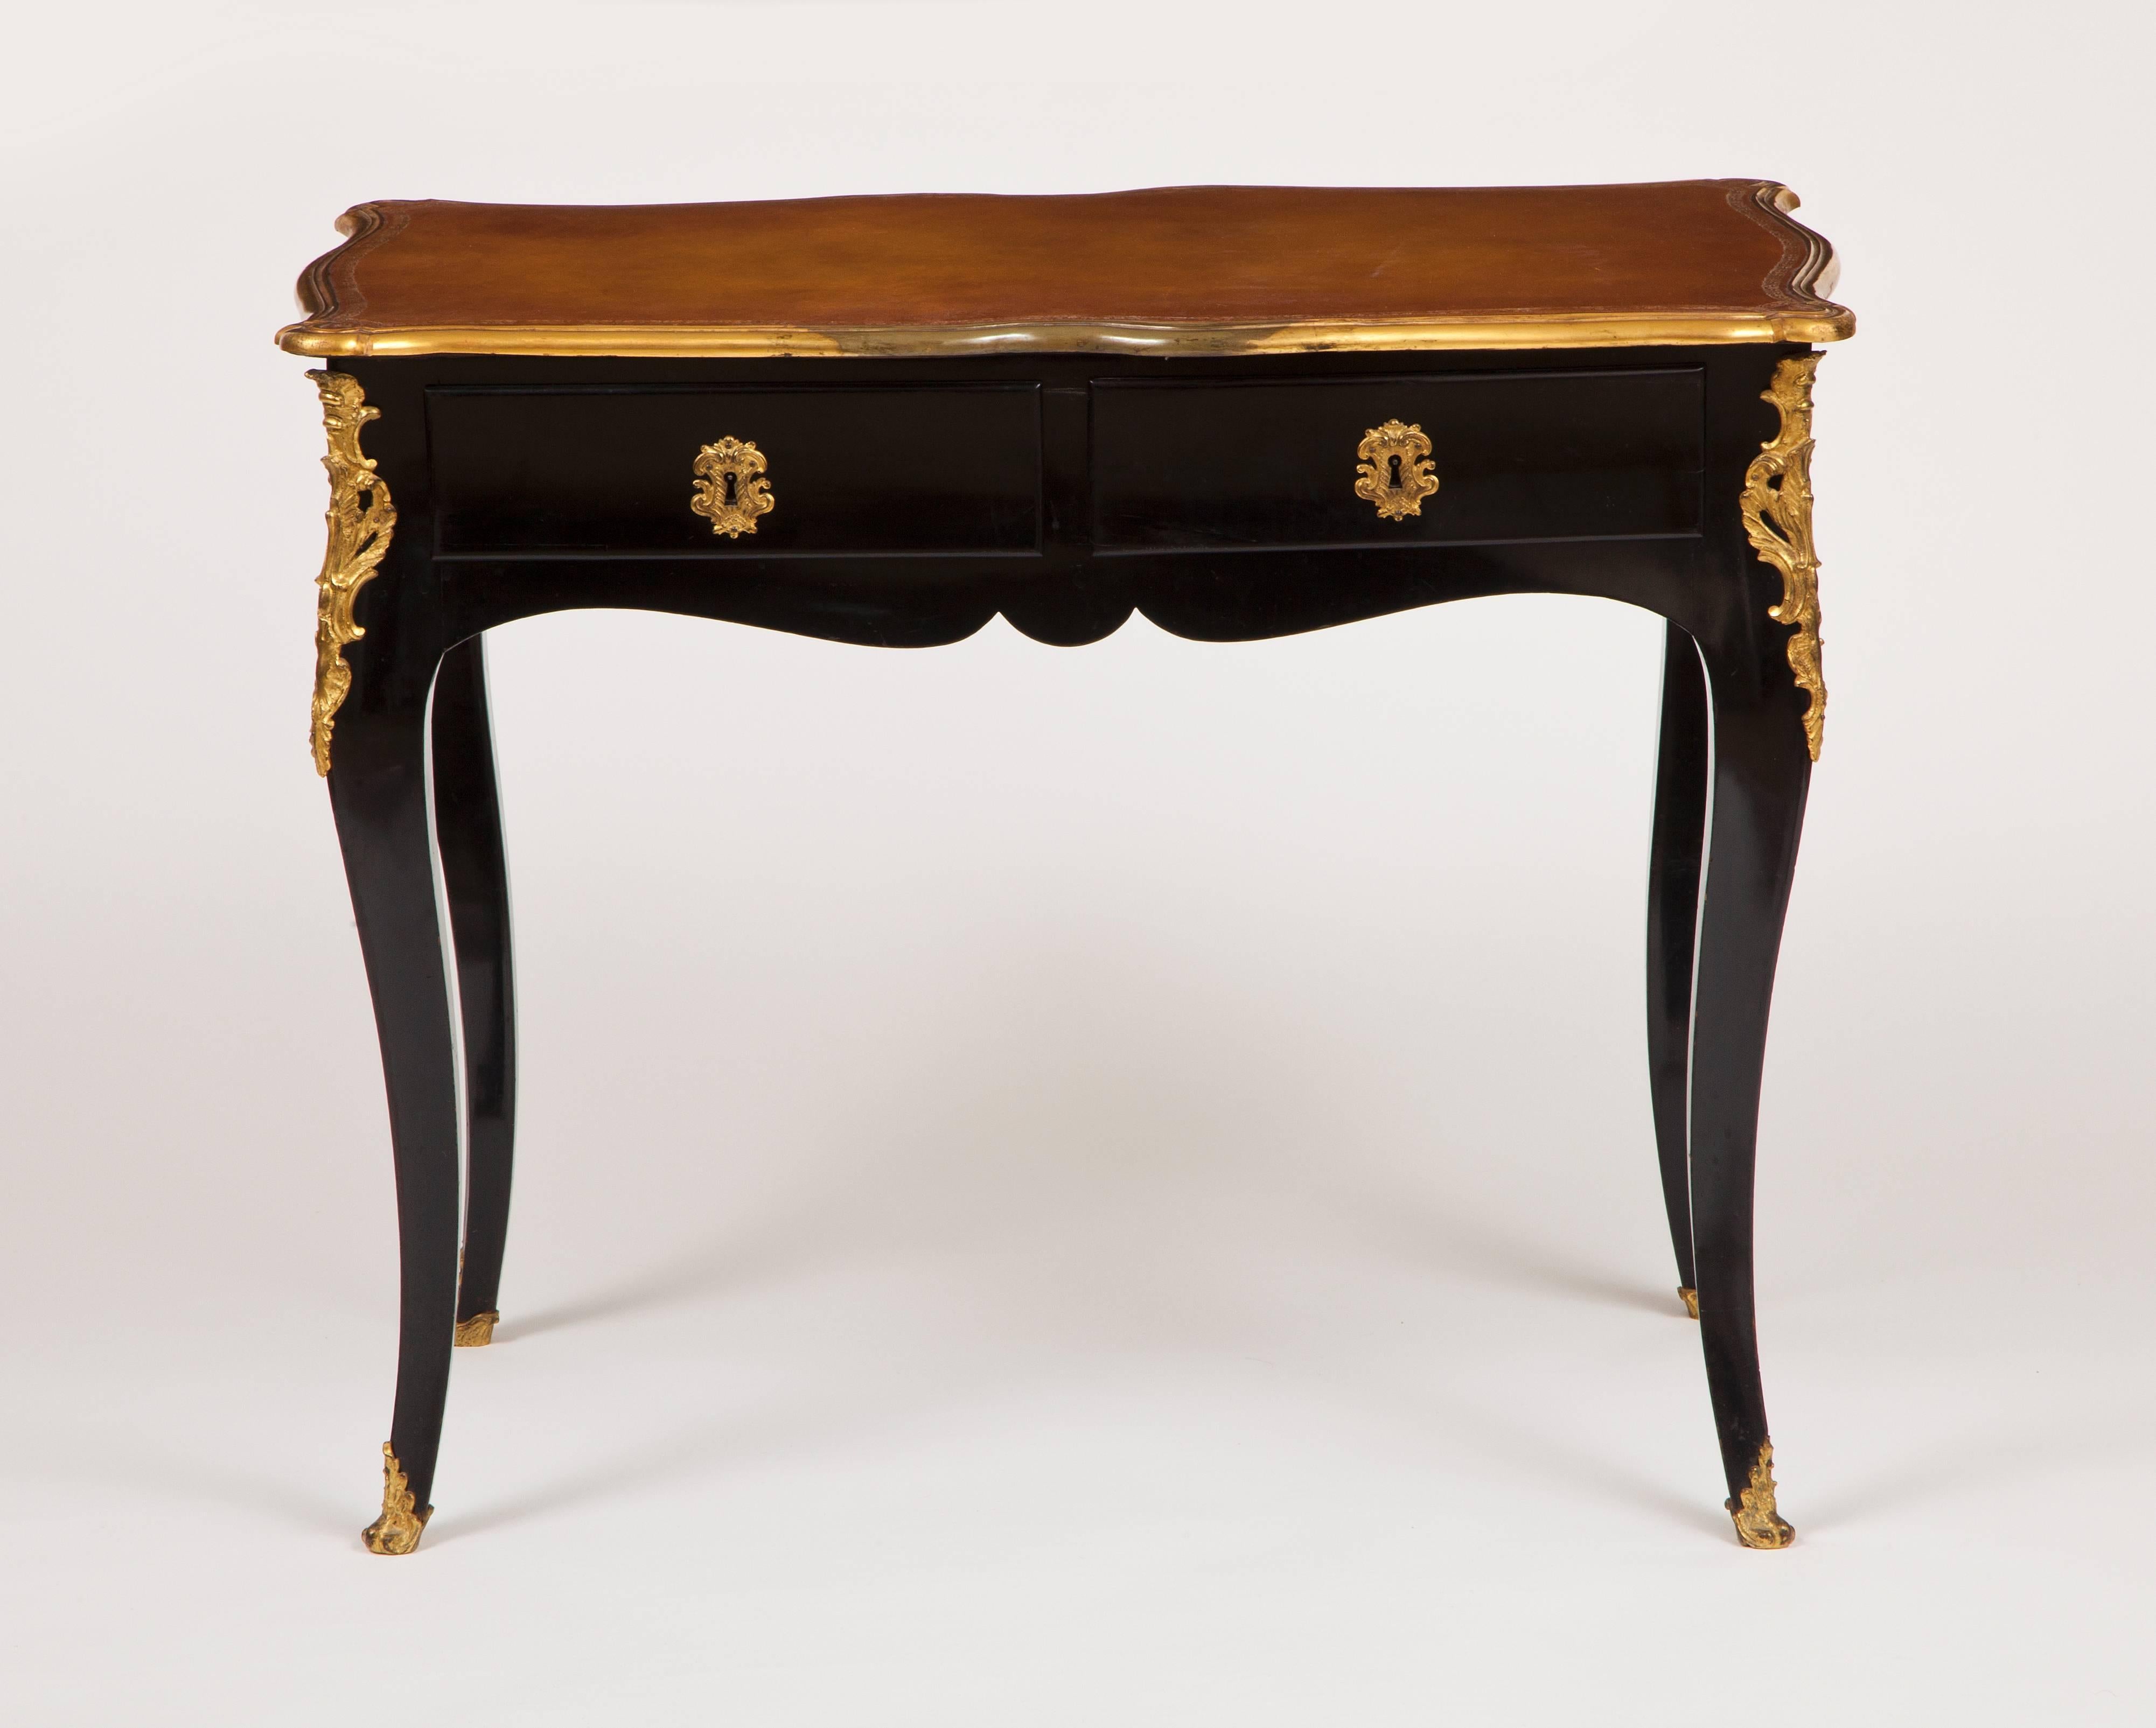 This fine French Louis XV period small writing table has a shaped top, with inset caramel colored tooled leather writing surface, banded with gilded bronze molding, above an ebonized wood frame with two drawers and an undulated apron, raised on